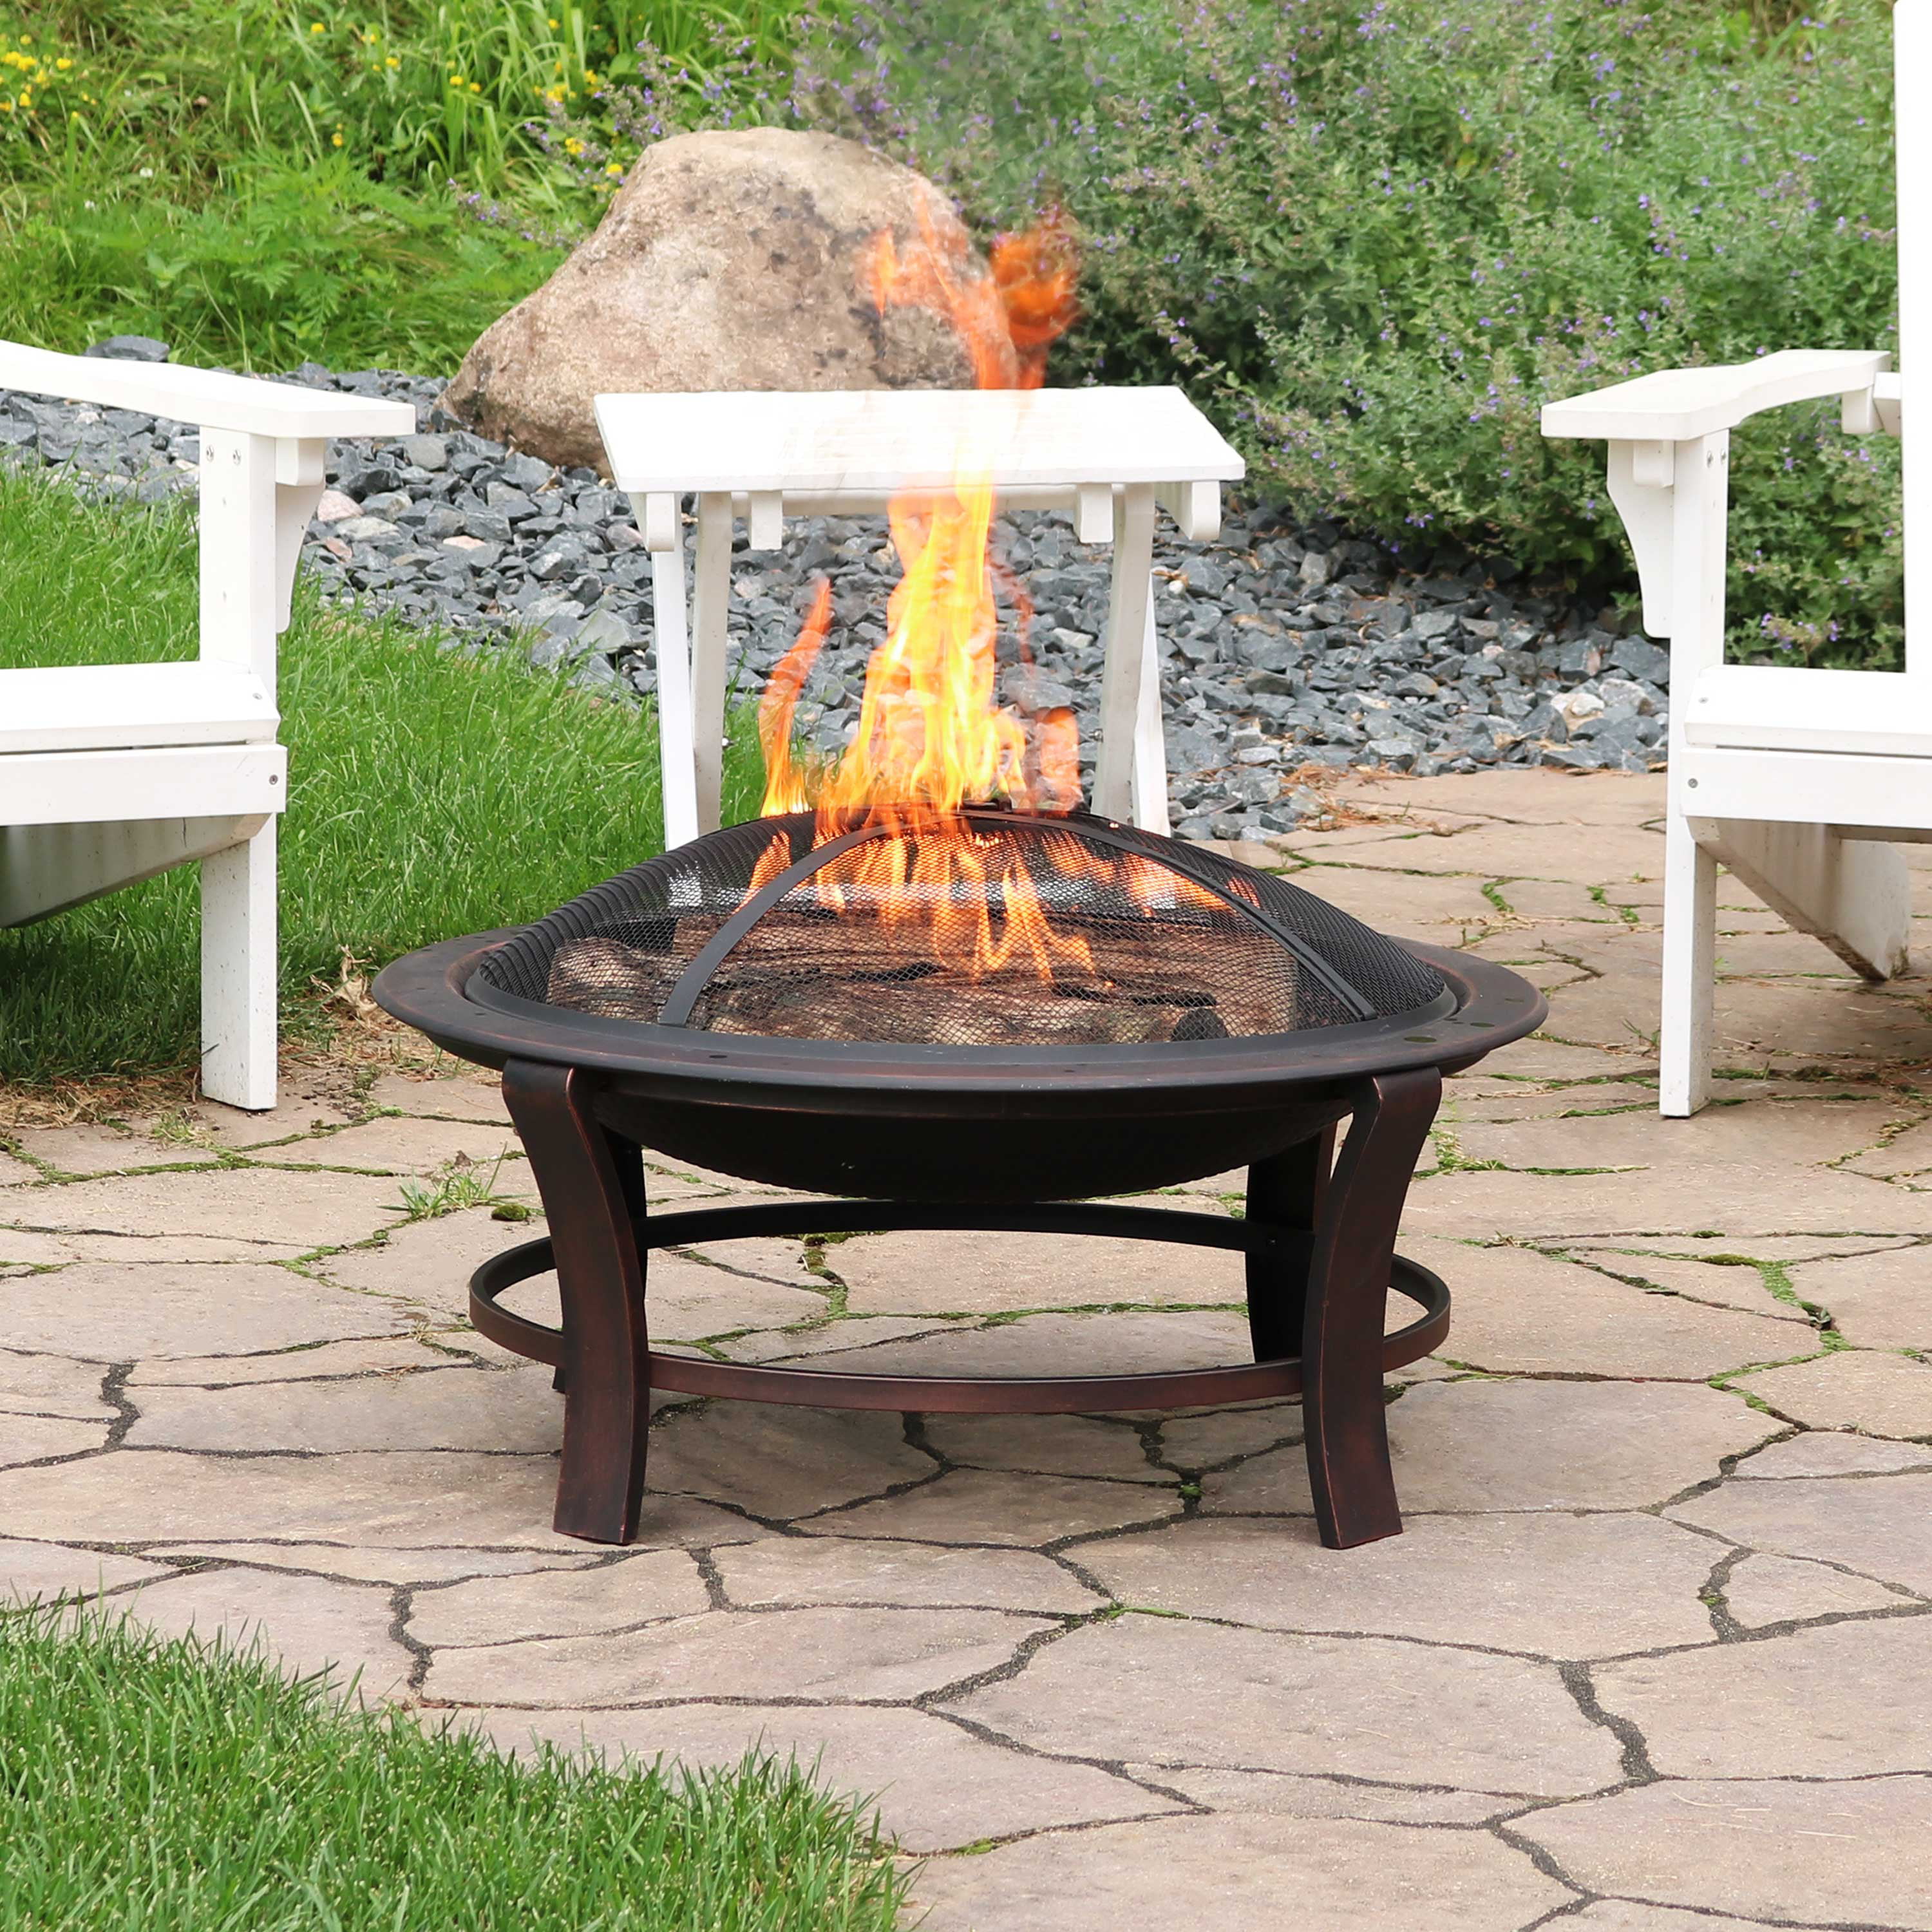 Sunnydaze Elevated Round Fire Pit Bowl, Round Patio Fire Pit